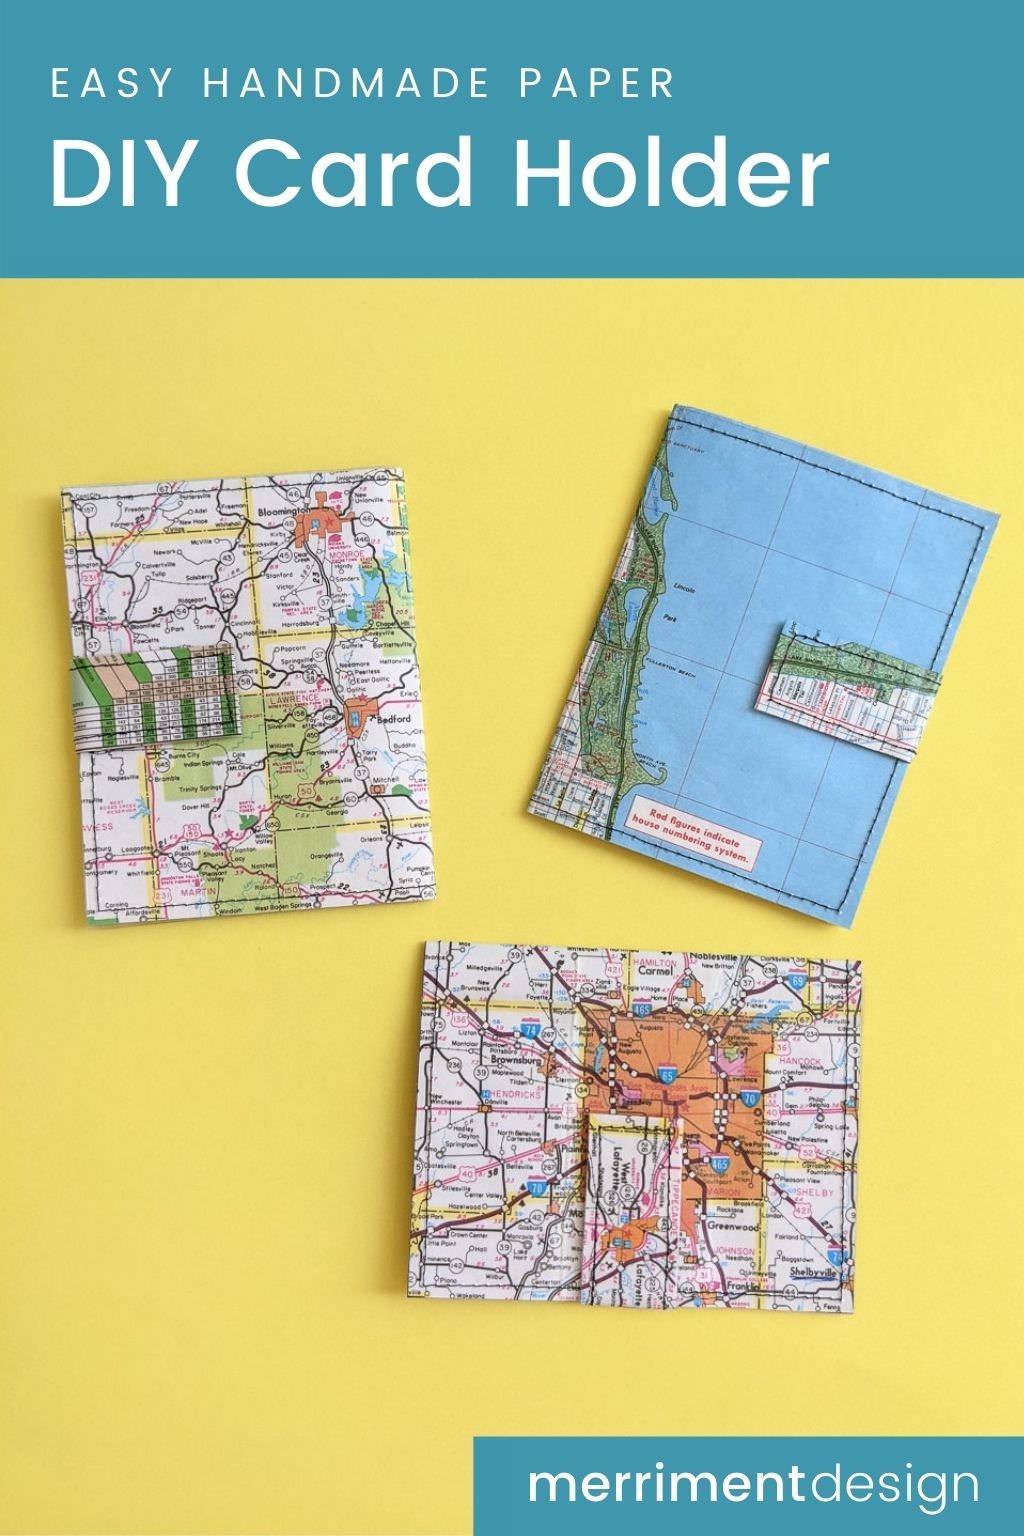 DIY card holder wallet craft tutorial from paper, old maps or books and vinyl